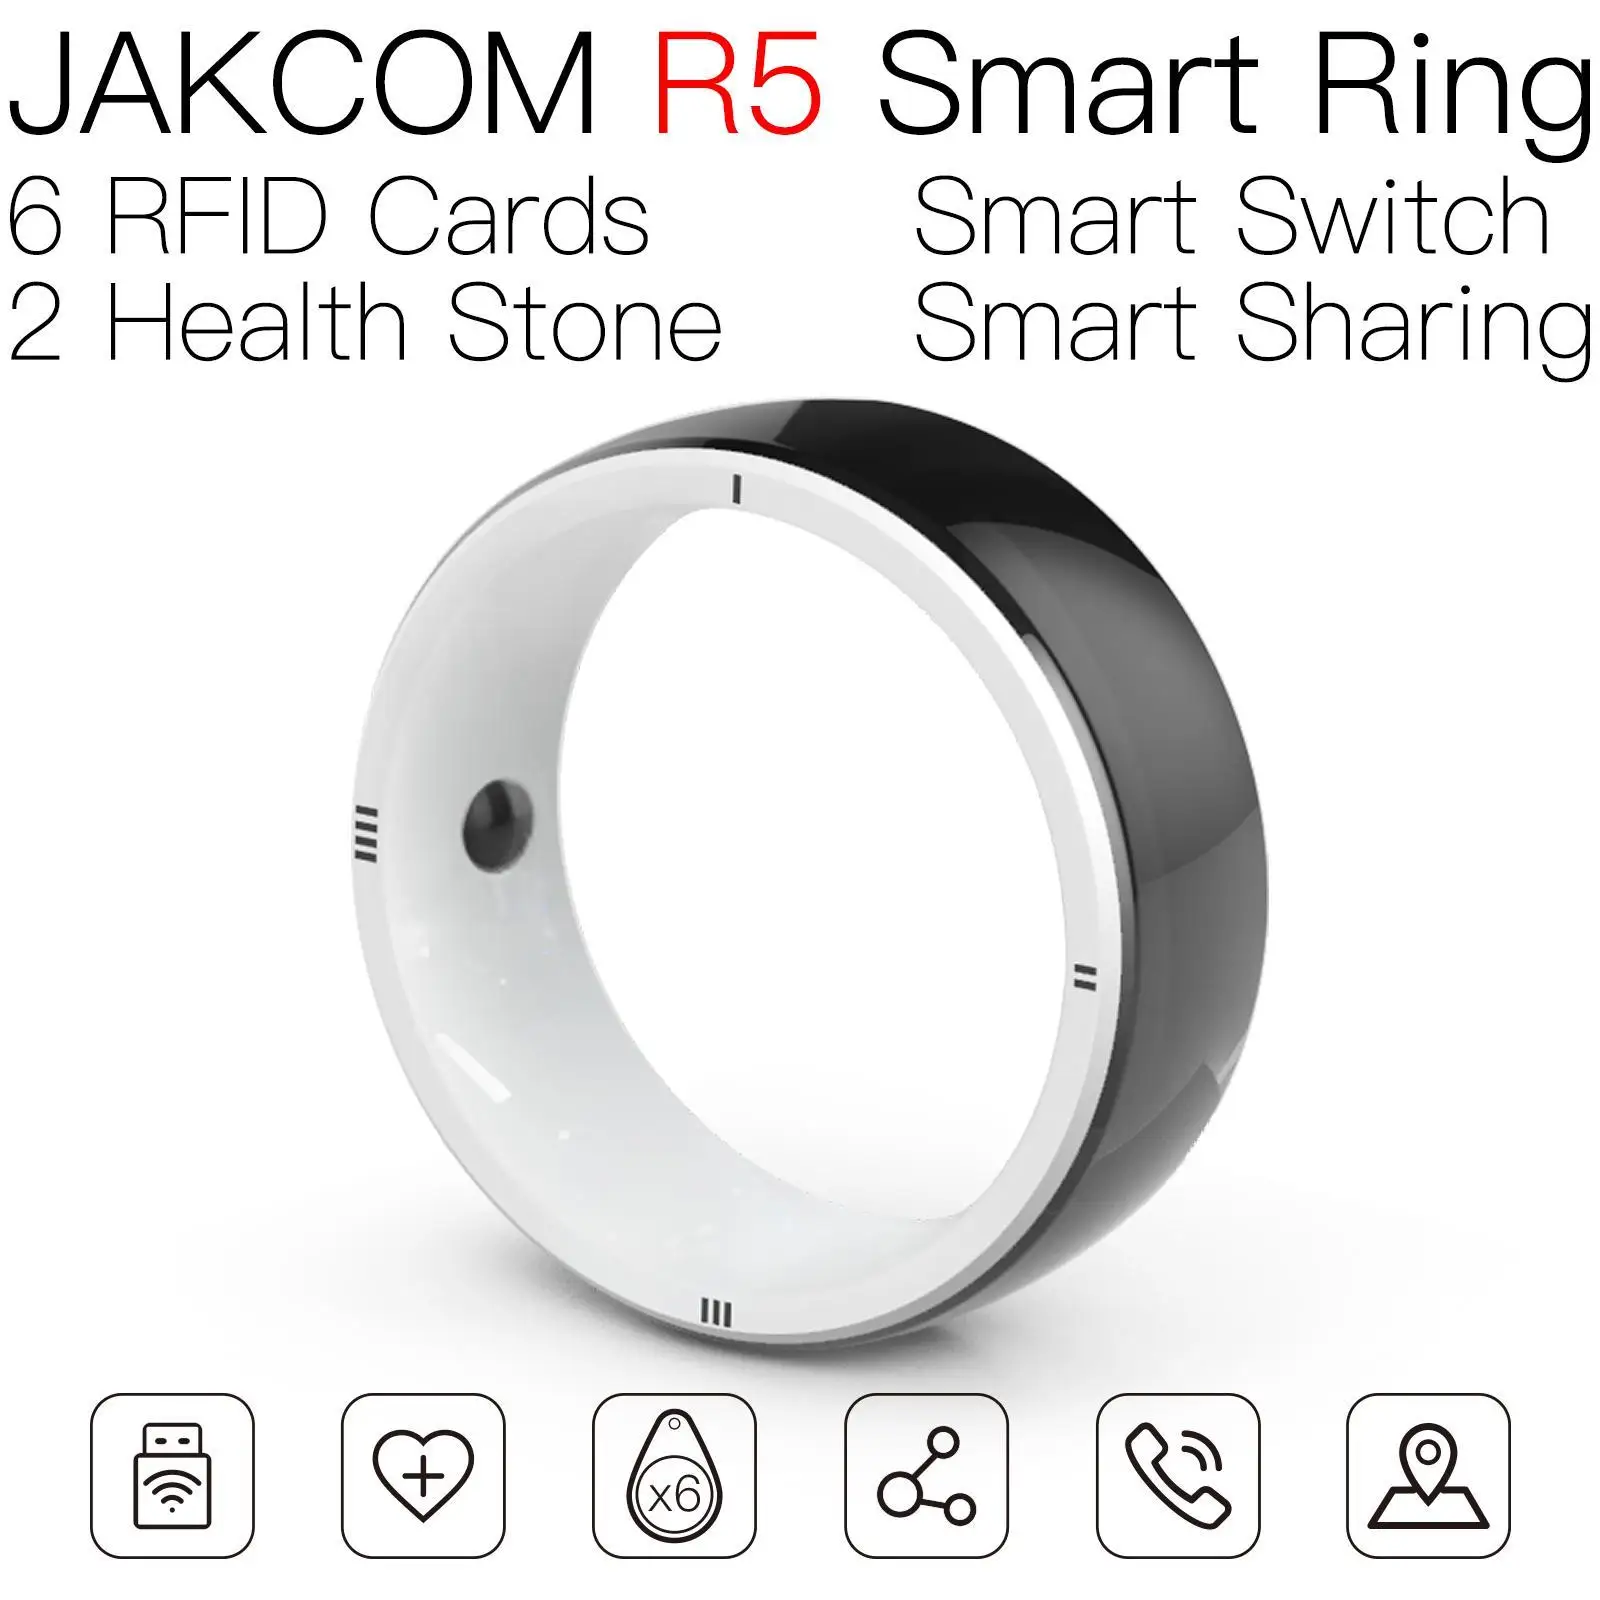 

JAKCOM R5 Smart Ring Super value as rfid 2 tag sharon said official store nfc 215 100pcs uid human chip dog pet necklace mct